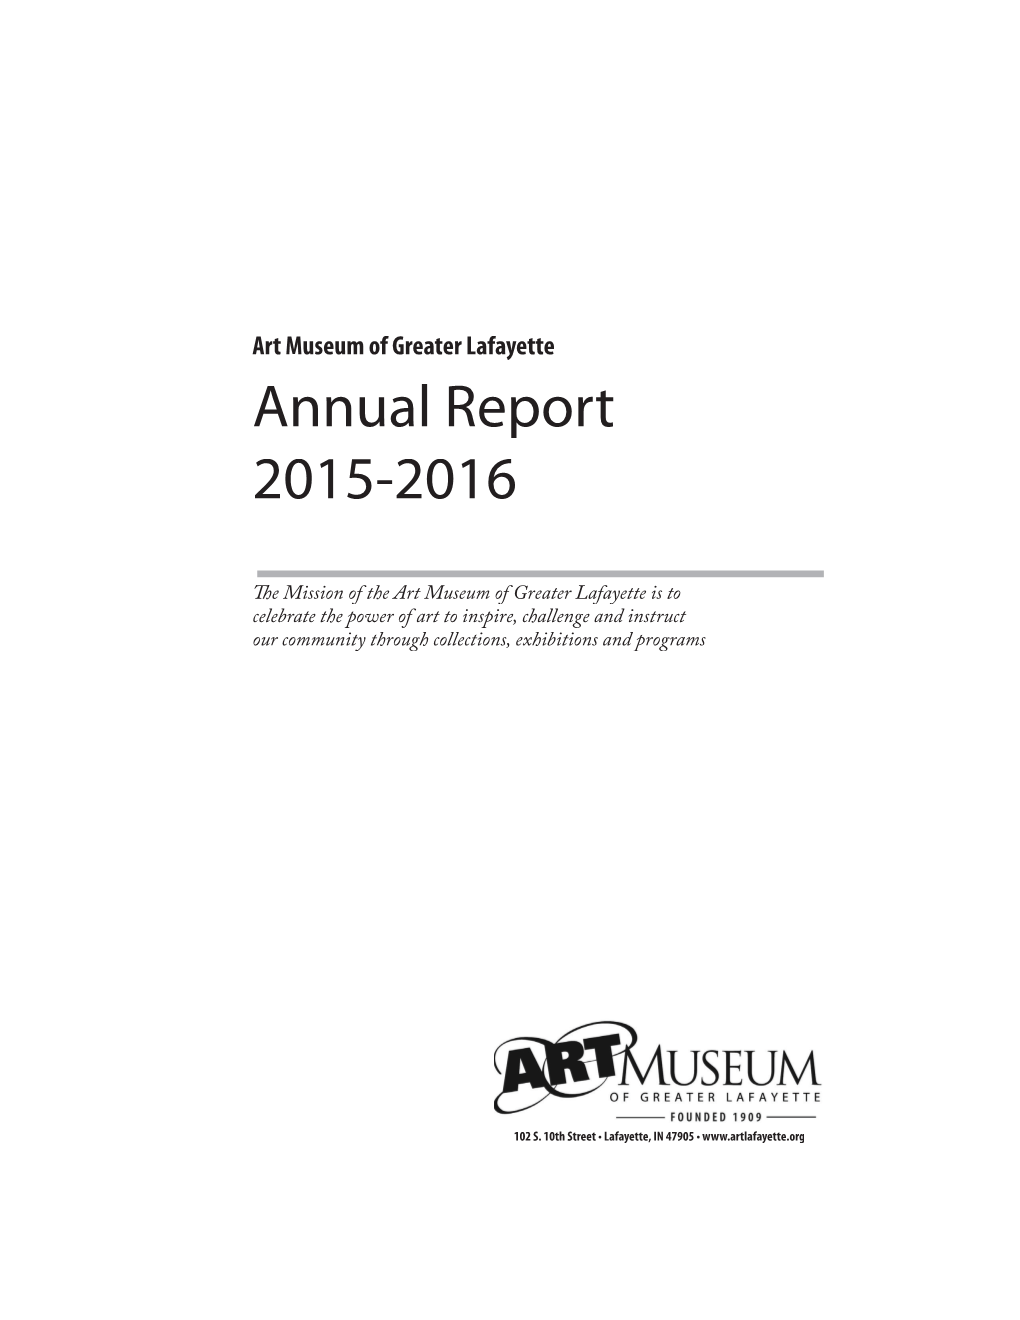 Art Museum of Greater Lafayette Annual Report 2015-2016